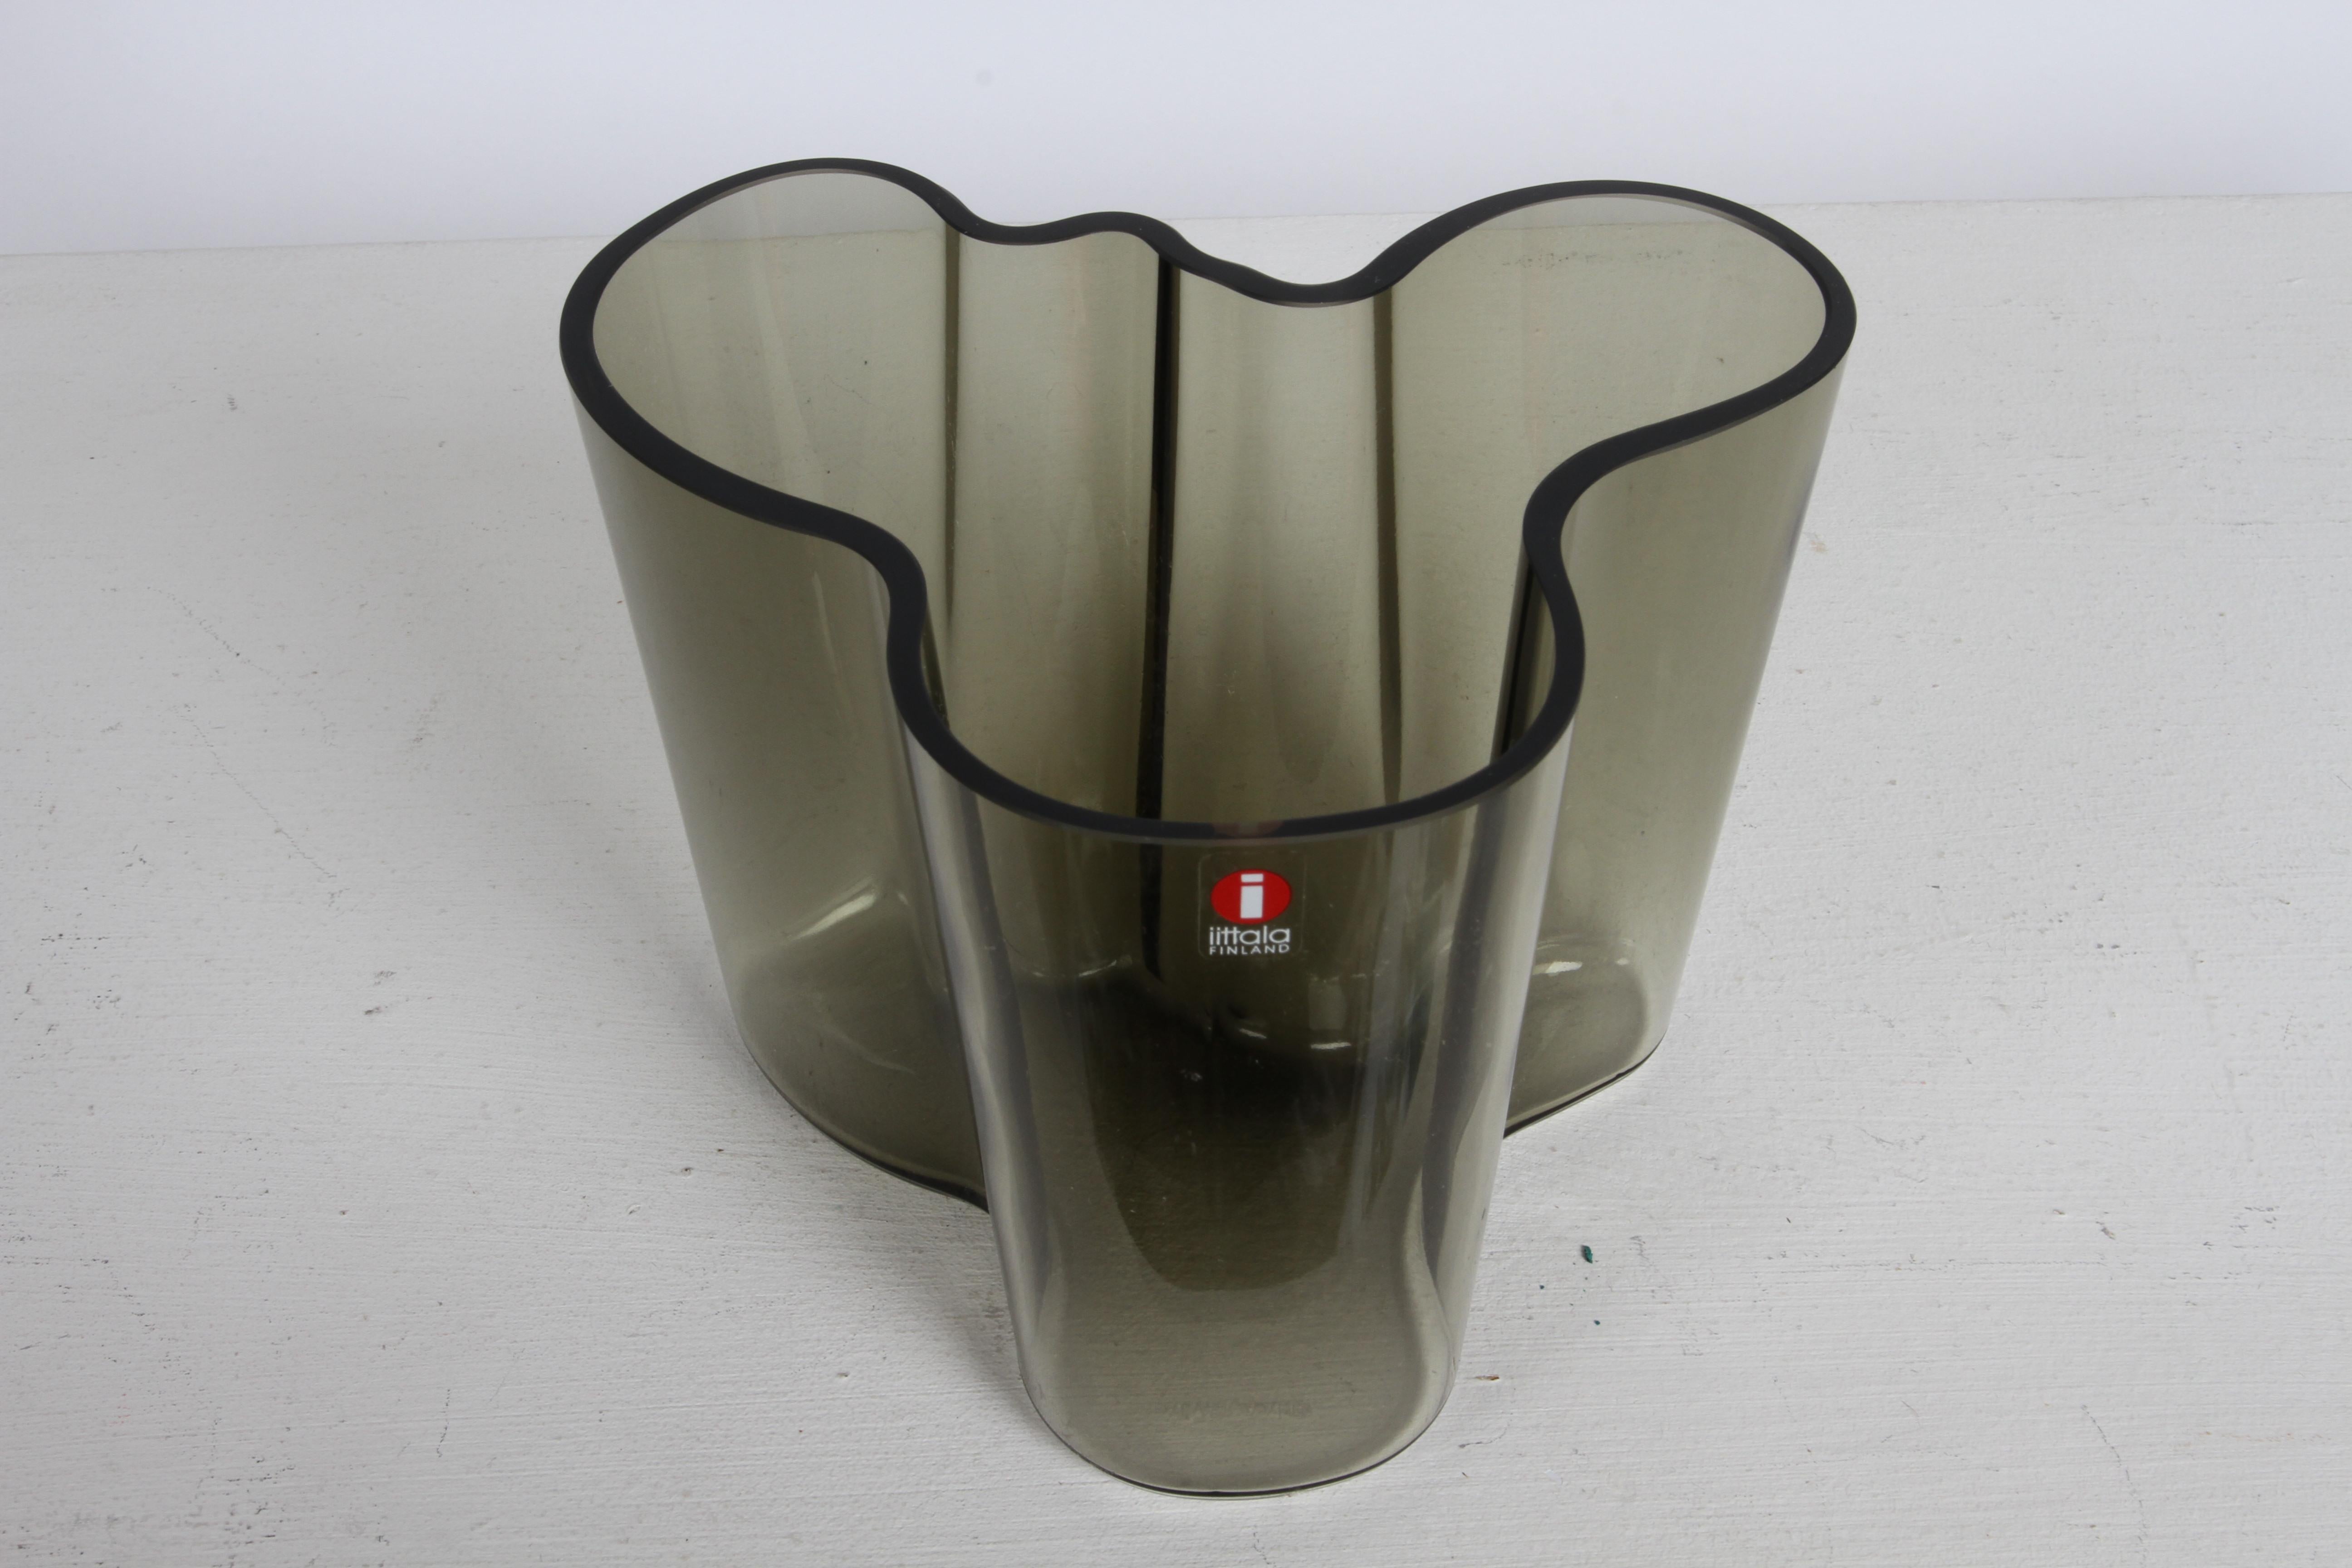 1970s MCM Alvar Aalto Savoy Vase 3030 in Smoke Gray Glass by Iittala Finland For Sale 5